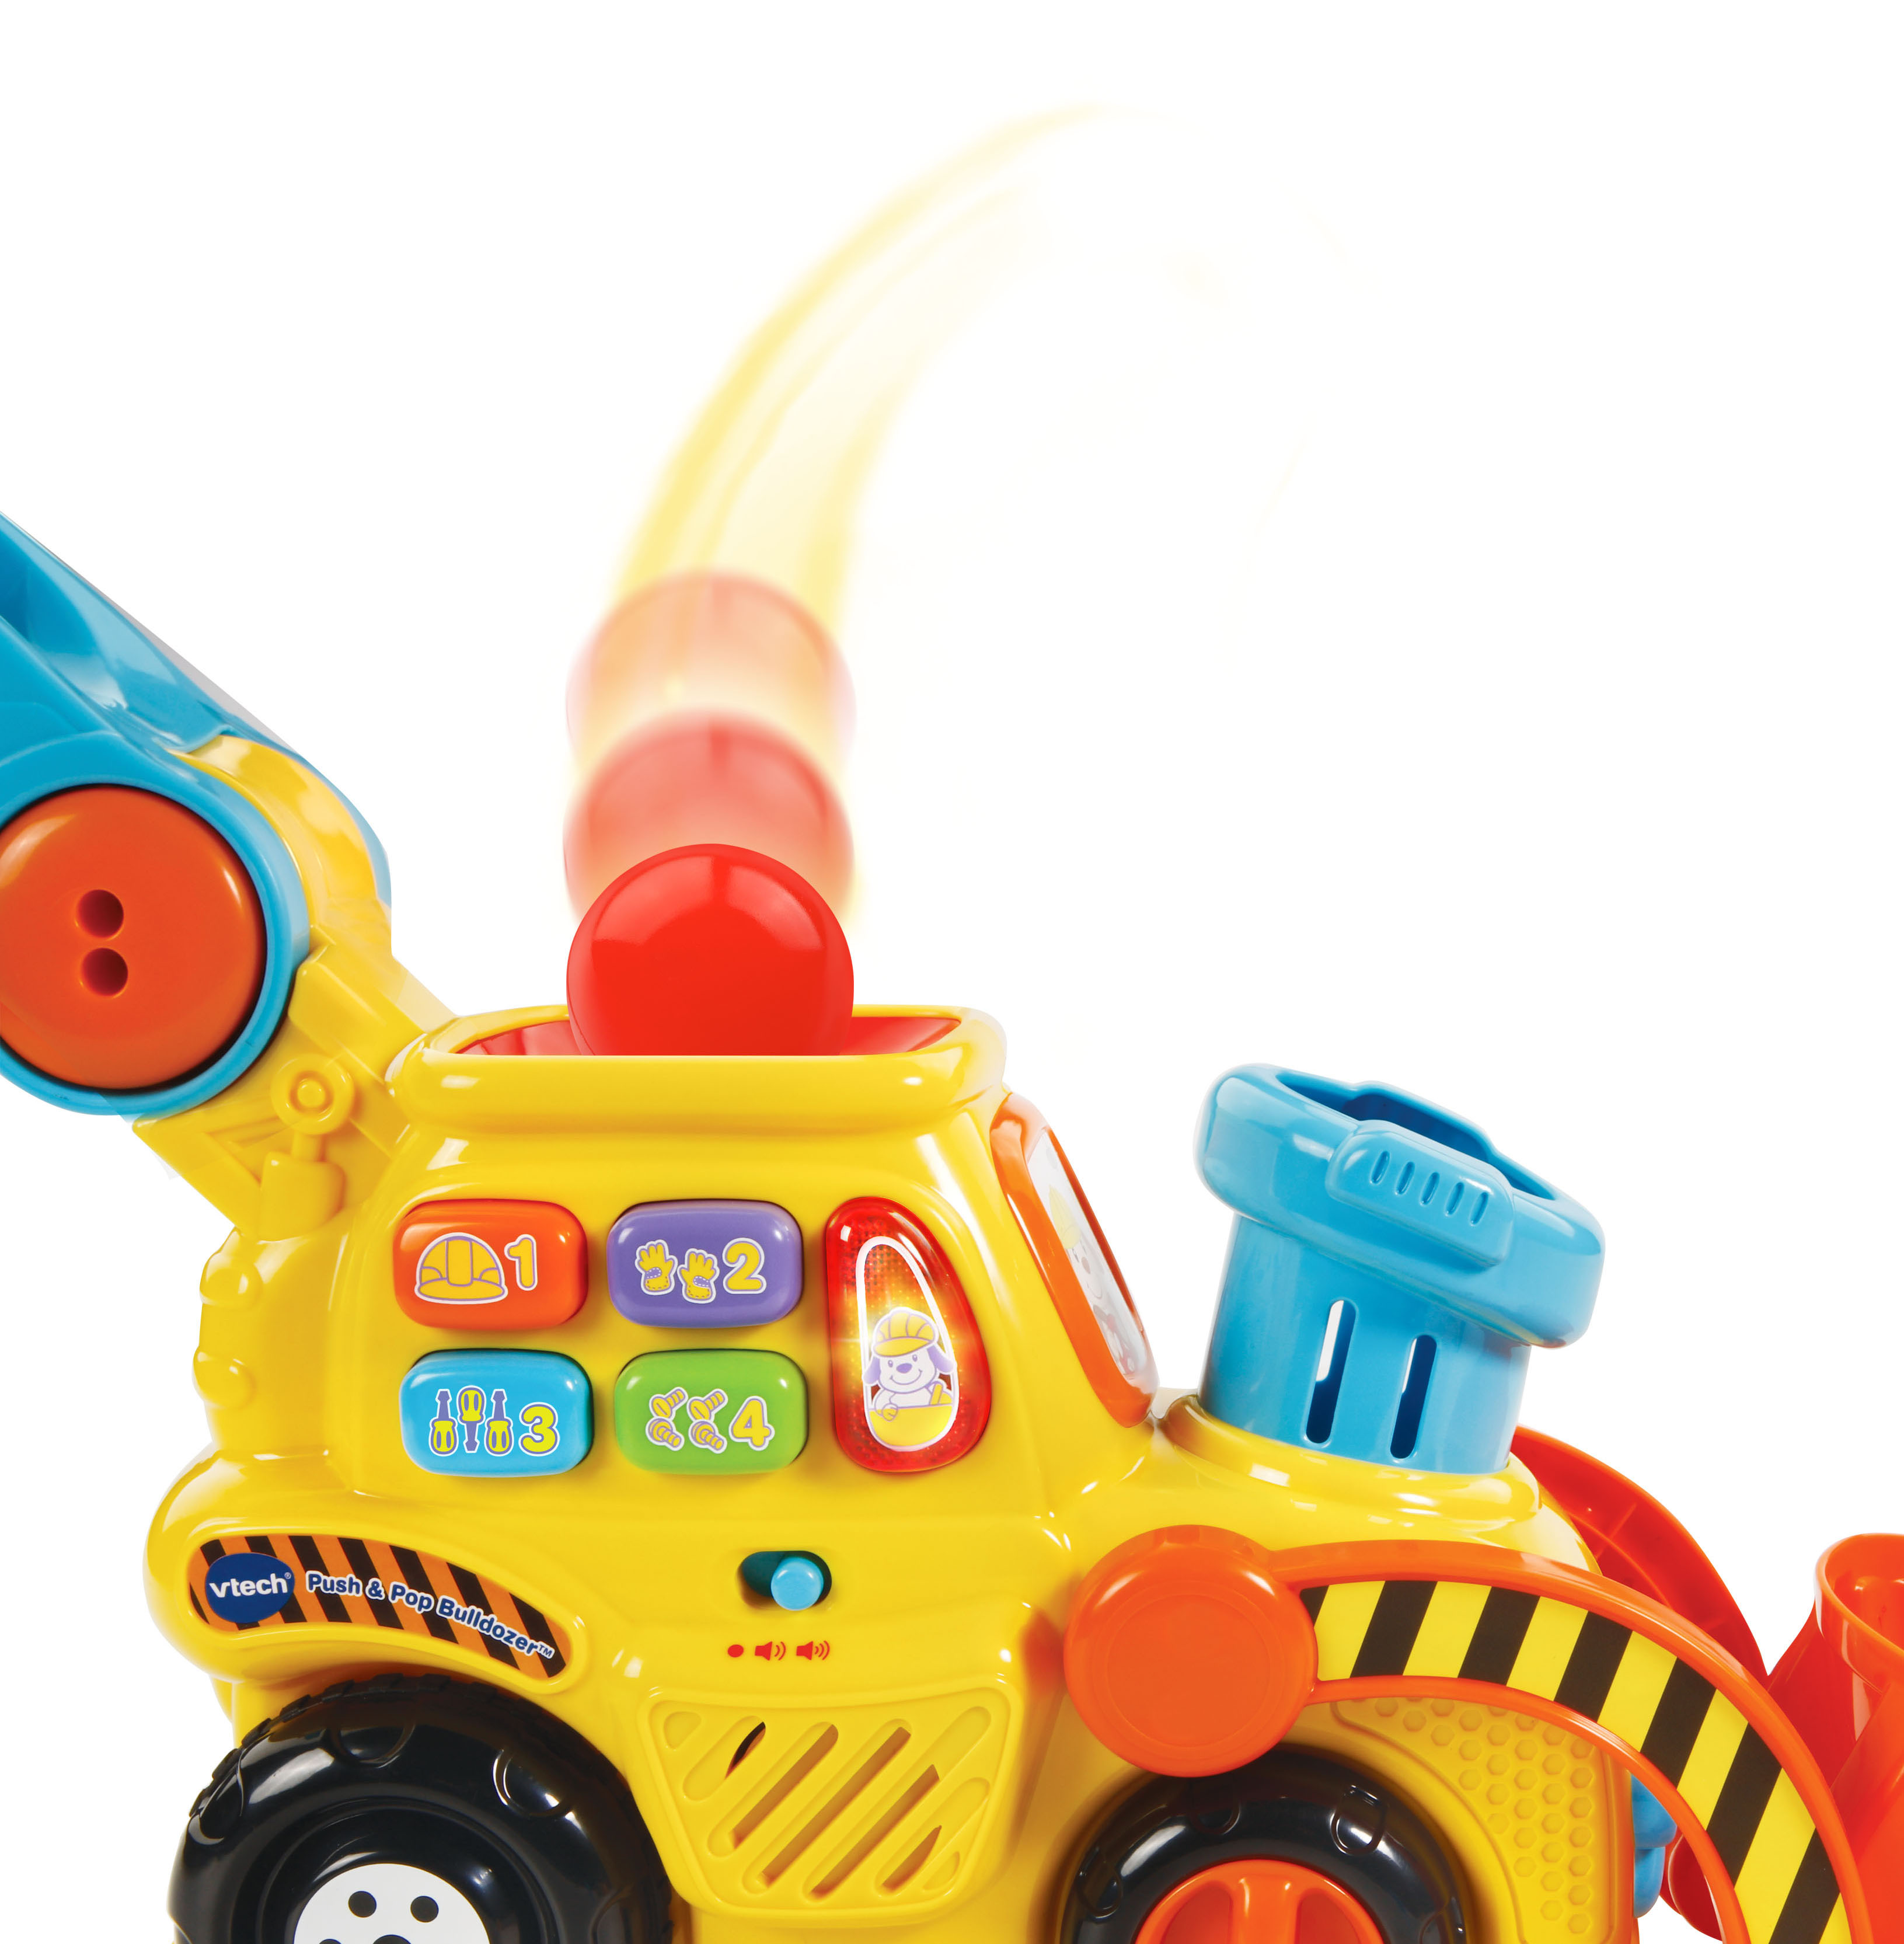 VTech, Pop-a-Balls, Push and Pop Bulldozer, Toddler Learning Toy - image 7 of 12